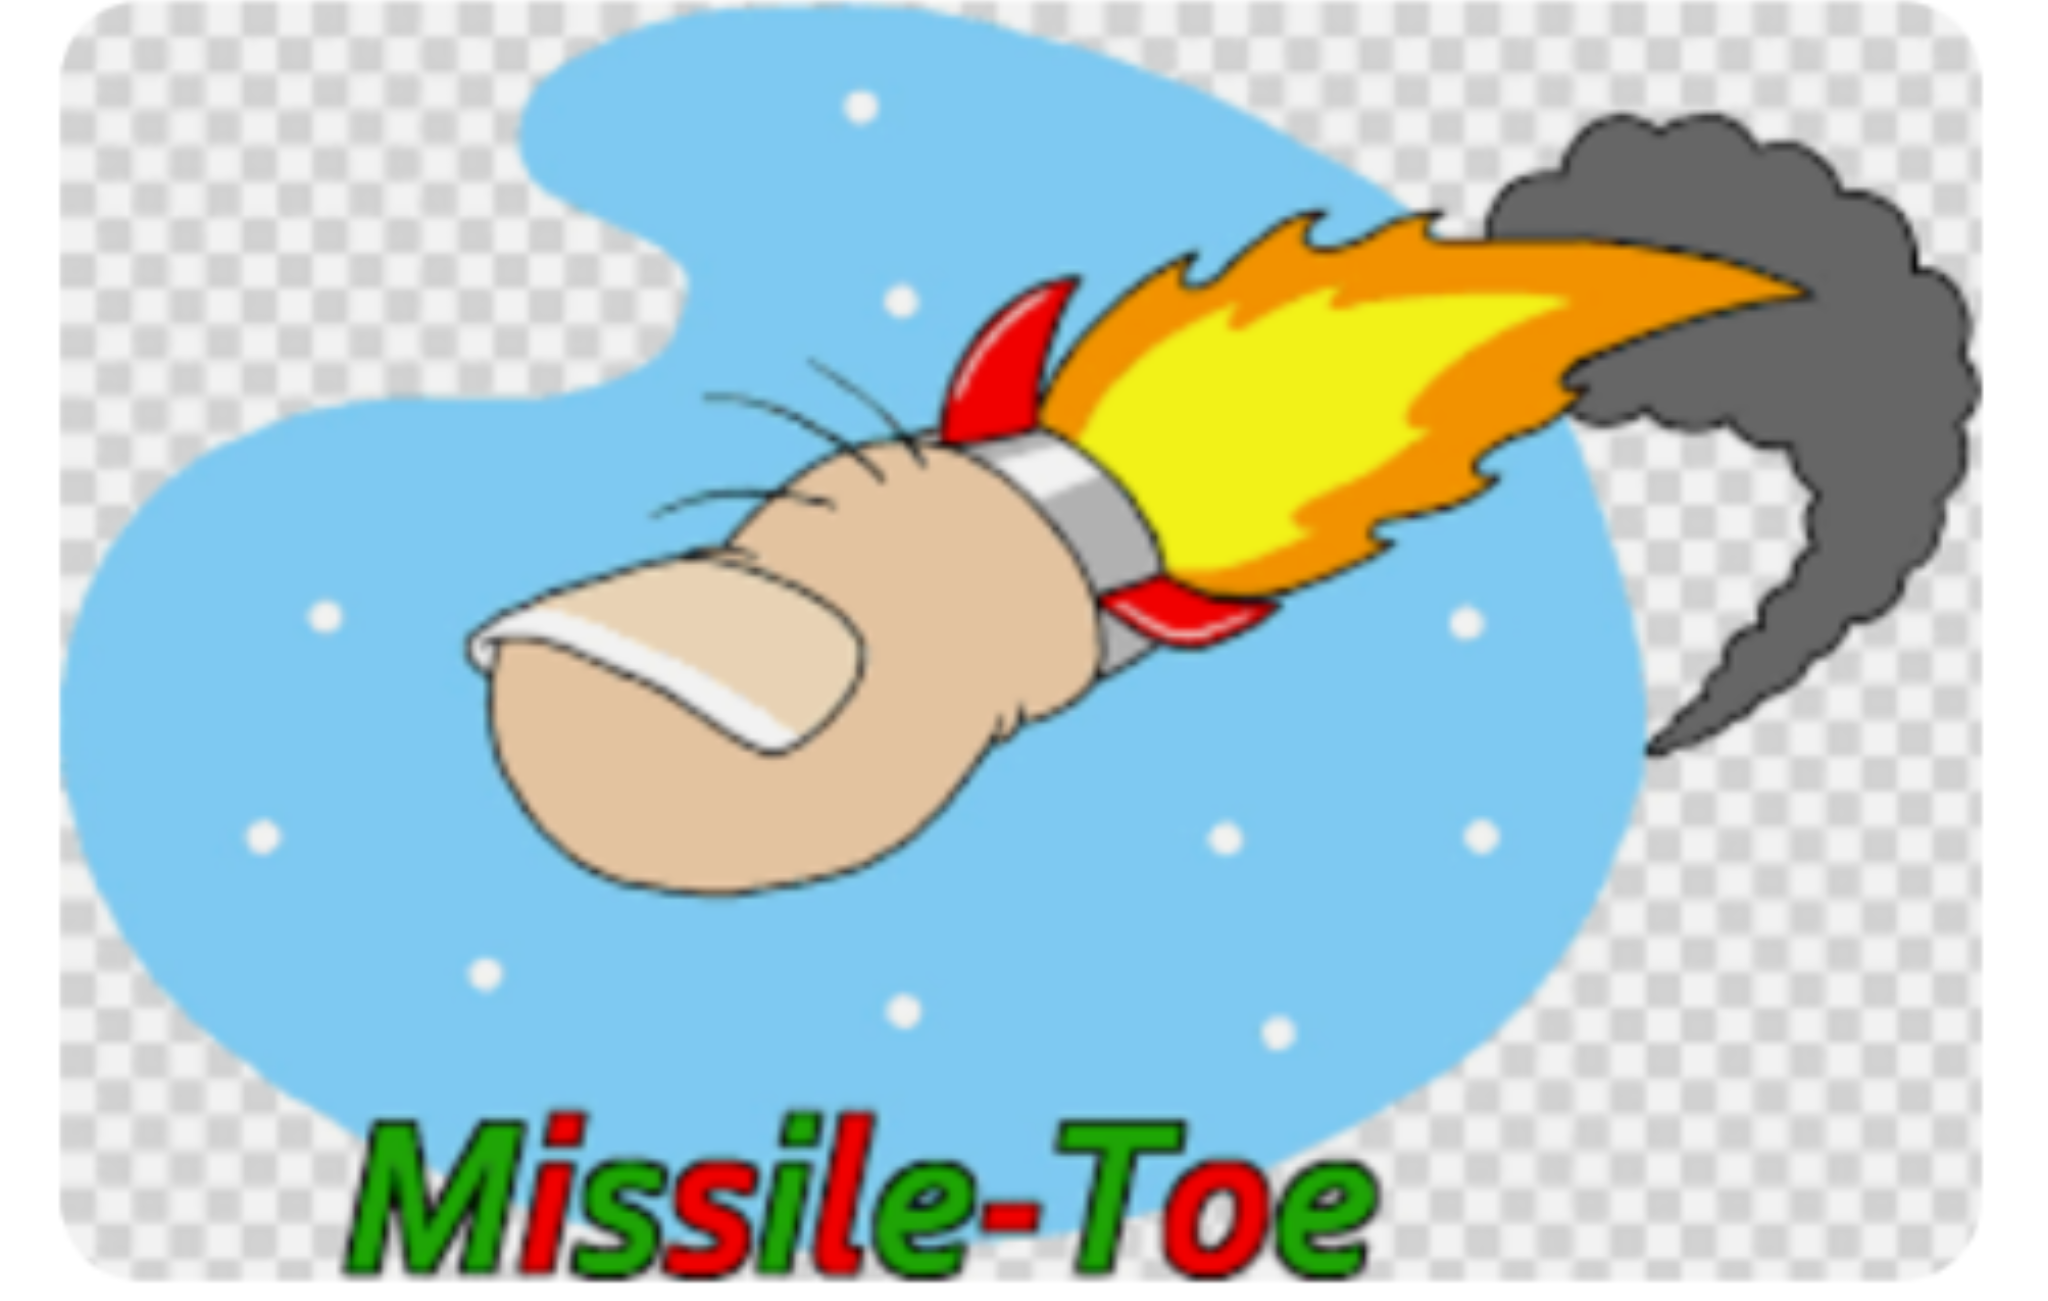 High Quality Missile toe Blank Meme Template